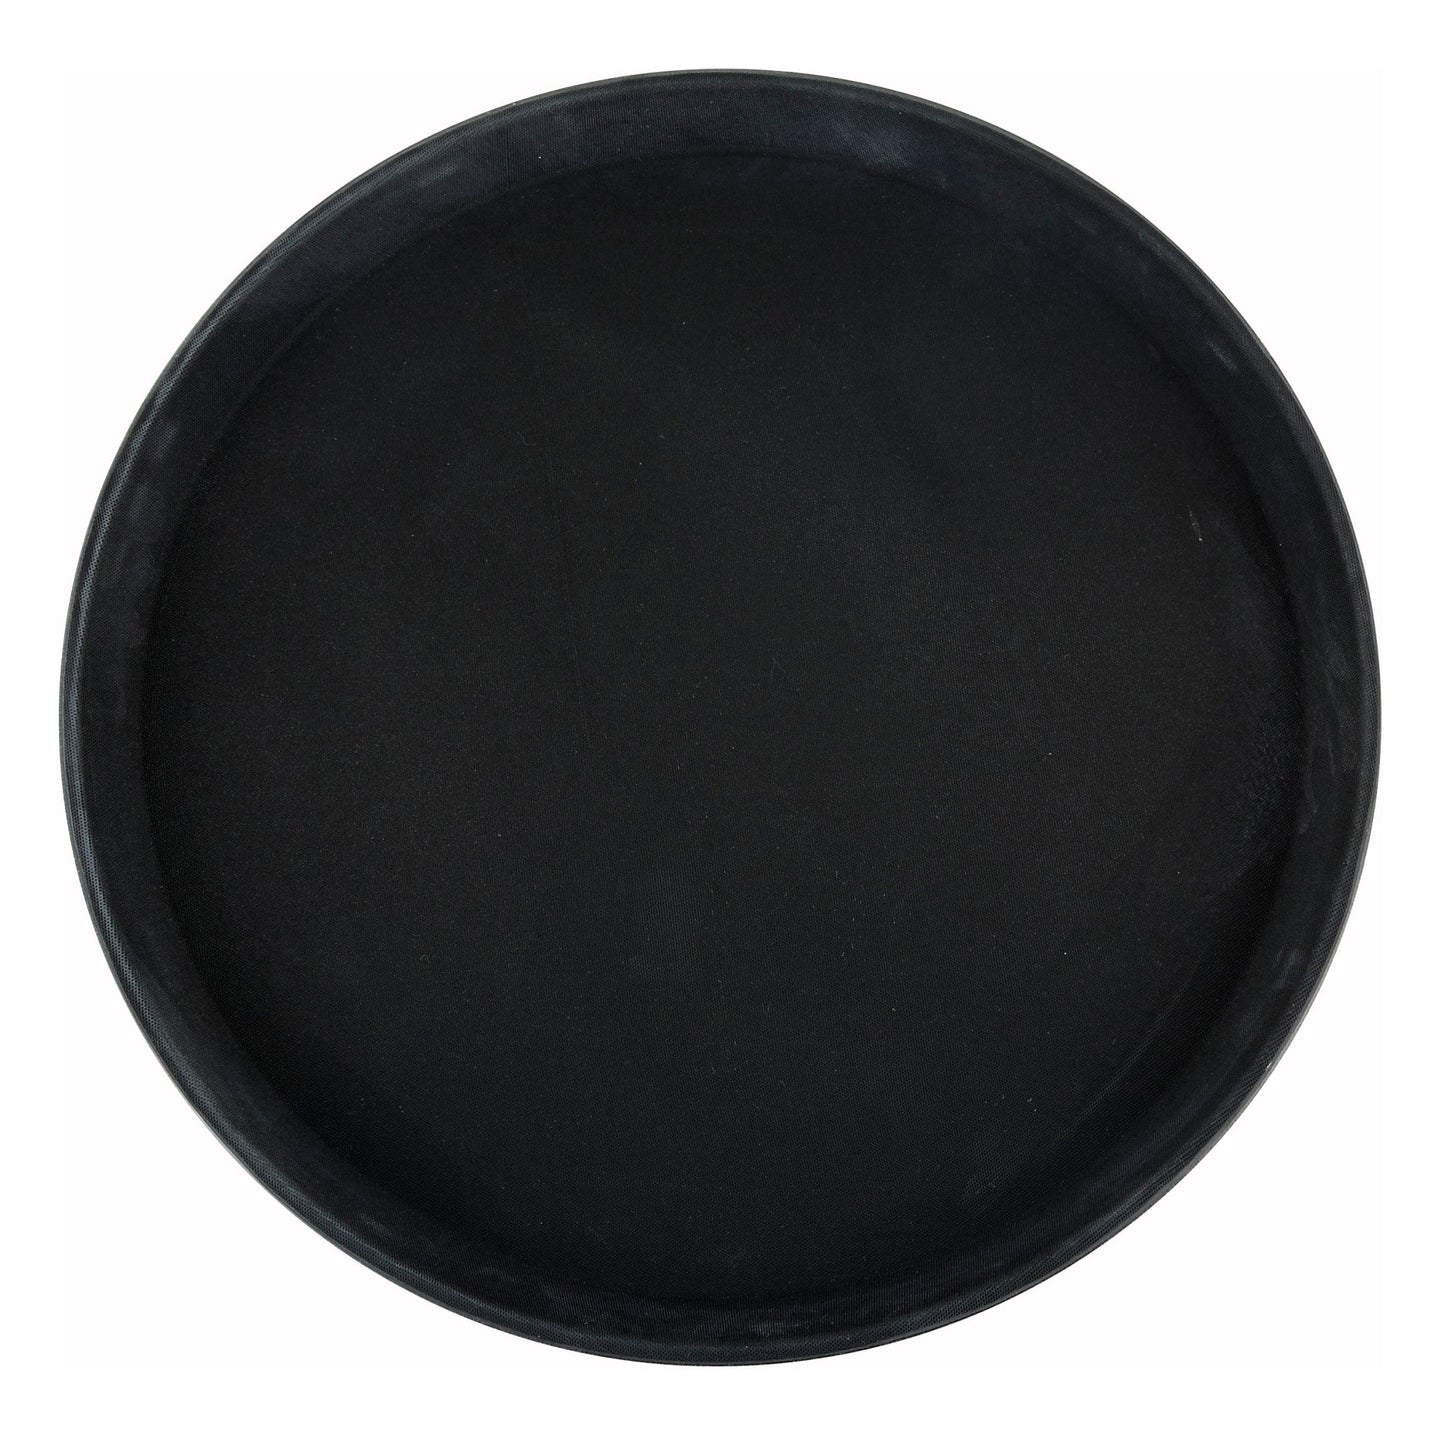 TRH-11K - Easy-Hold 11" Round Rubber-Lined Plastic Tray